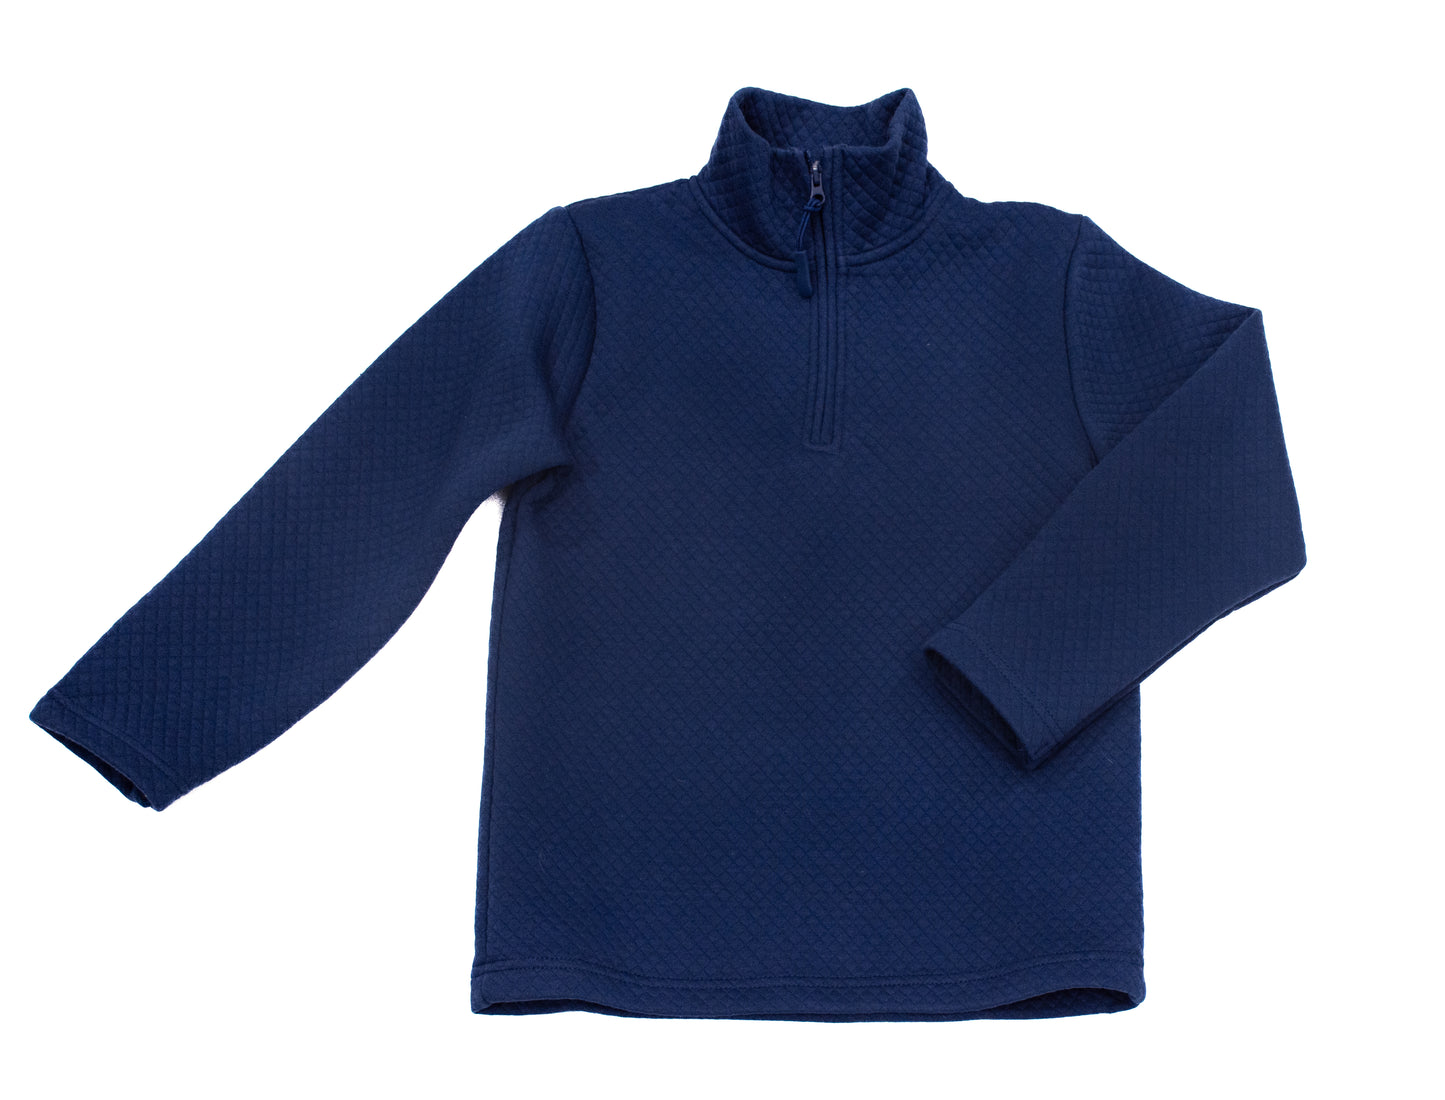 Quilted Navy 1/4 Zip pullover*